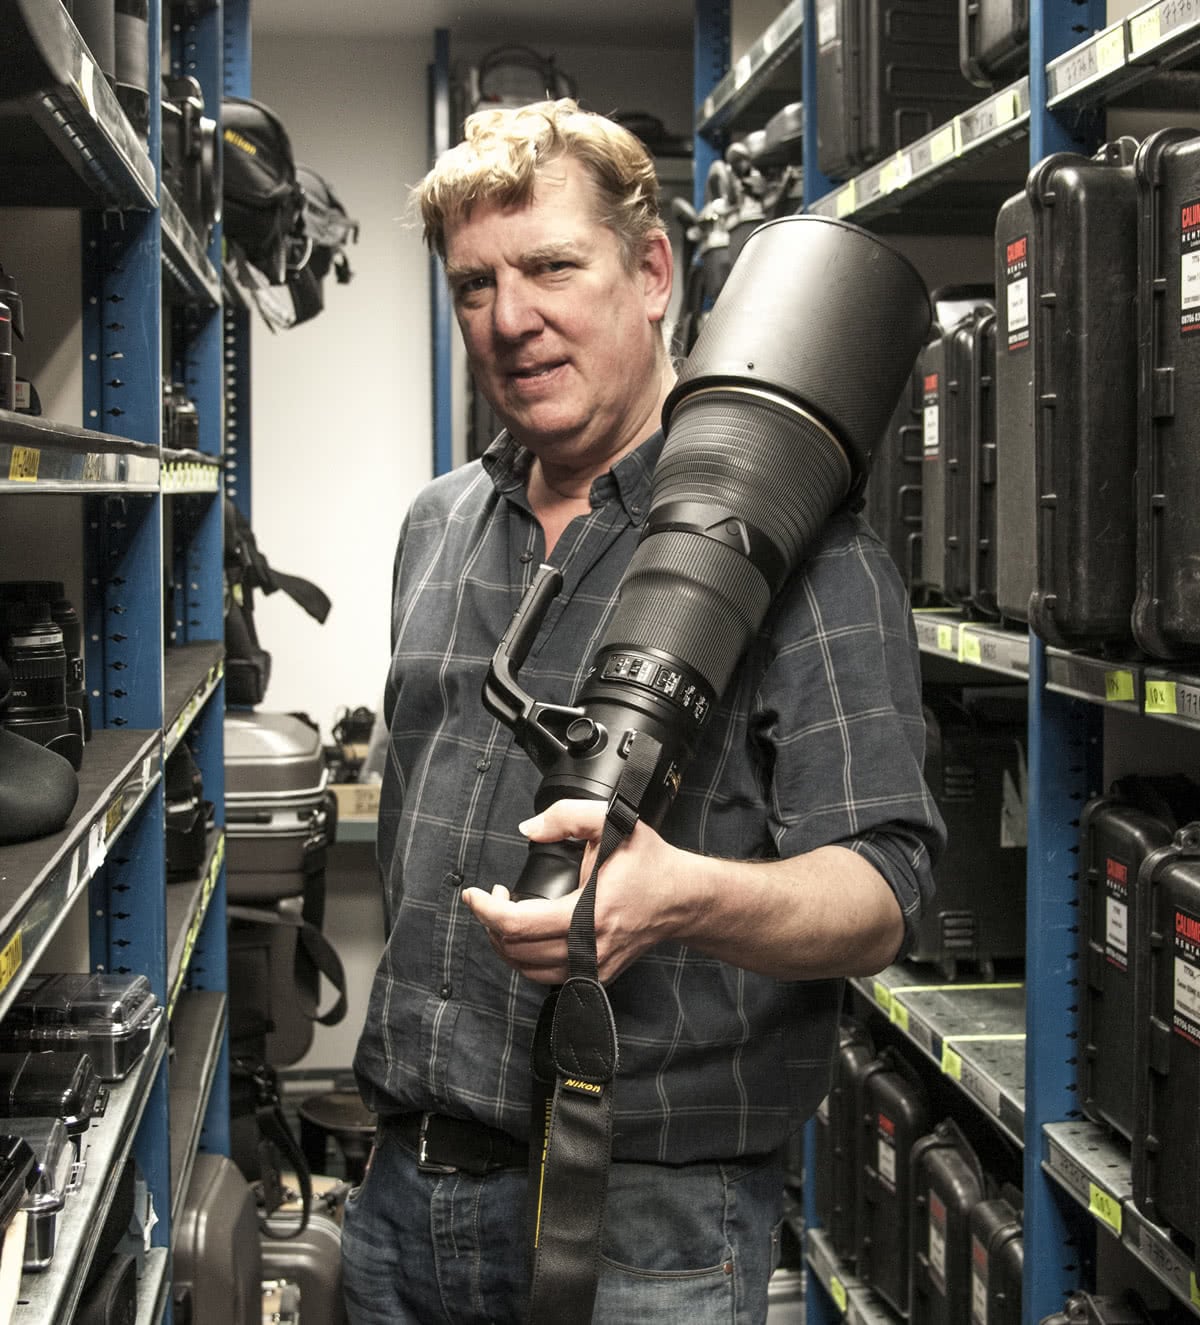 Wex Rental carry a wide range of lenses, including such beats as the Nikkor 800mm ƒ/5.6G